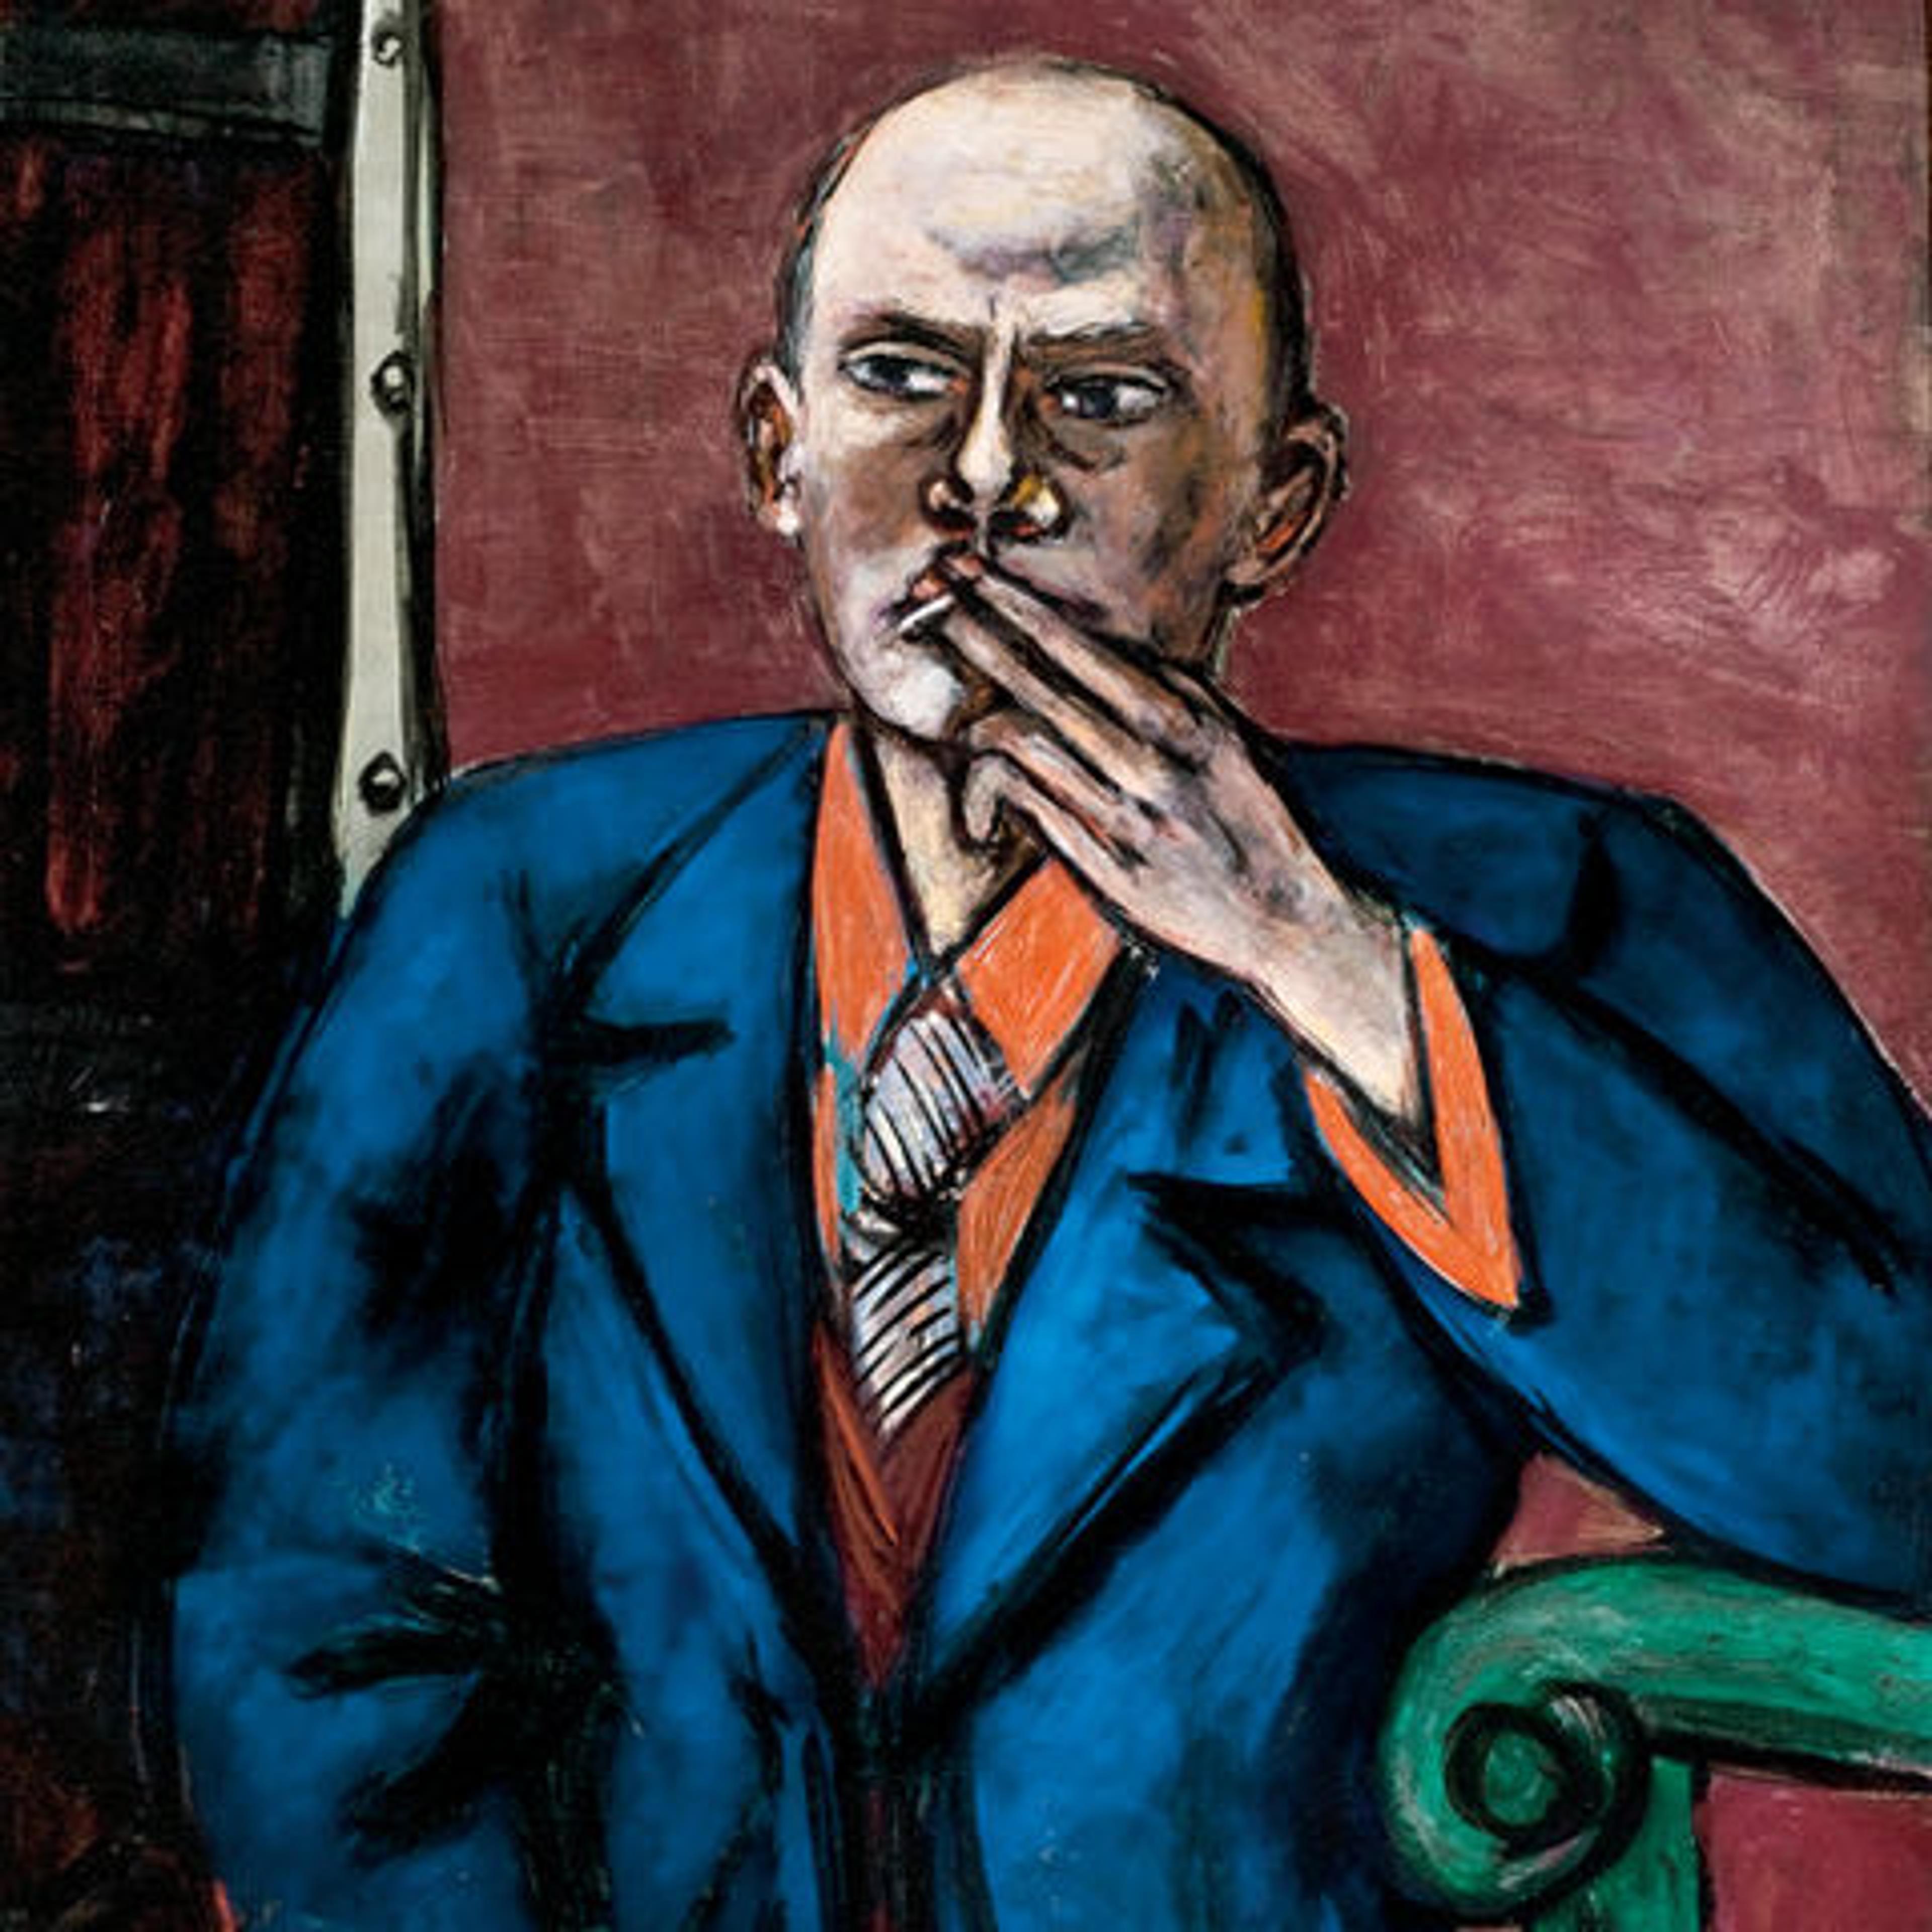 Painting of man in blue jacket